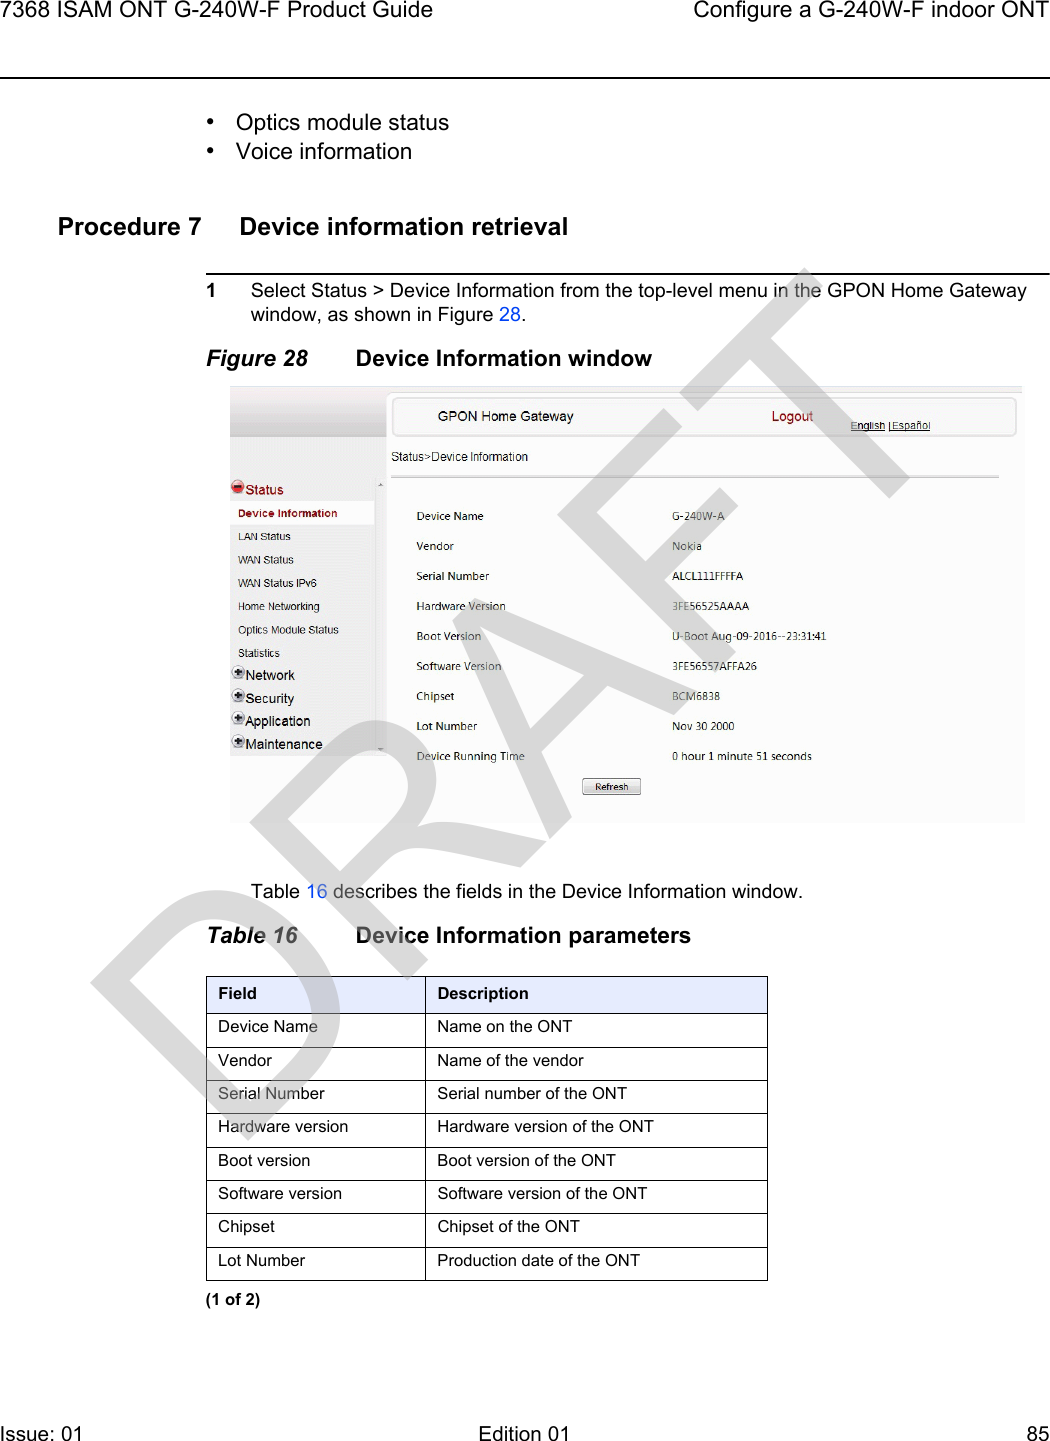 7368 ISAM ONT G-240W-F Product Guide Configure a G-240W-F indoor ONTIssue: 01 Edition 01 85 •Optics module status•Voice informationProcedure 7 Device information retrieval1Select Status &gt; Device Information from the top-level menu in the GPON Home Gateway window, as shown in Figure 28.Figure 28 Device Information windowTable 16 describes the fields in the Device Information window.Table 16 Device Information parametersField DescriptionDevice Name Name on the ONTVendor Name of the vendorSerial Number Serial number of the ONTHardware version Hardware version of the ONTBoot version Boot version of the ONTSoftware version Software version of the ONTChipset Chipset of the ONTLot Number Production date of the ONT(1 of 2)DRAFT